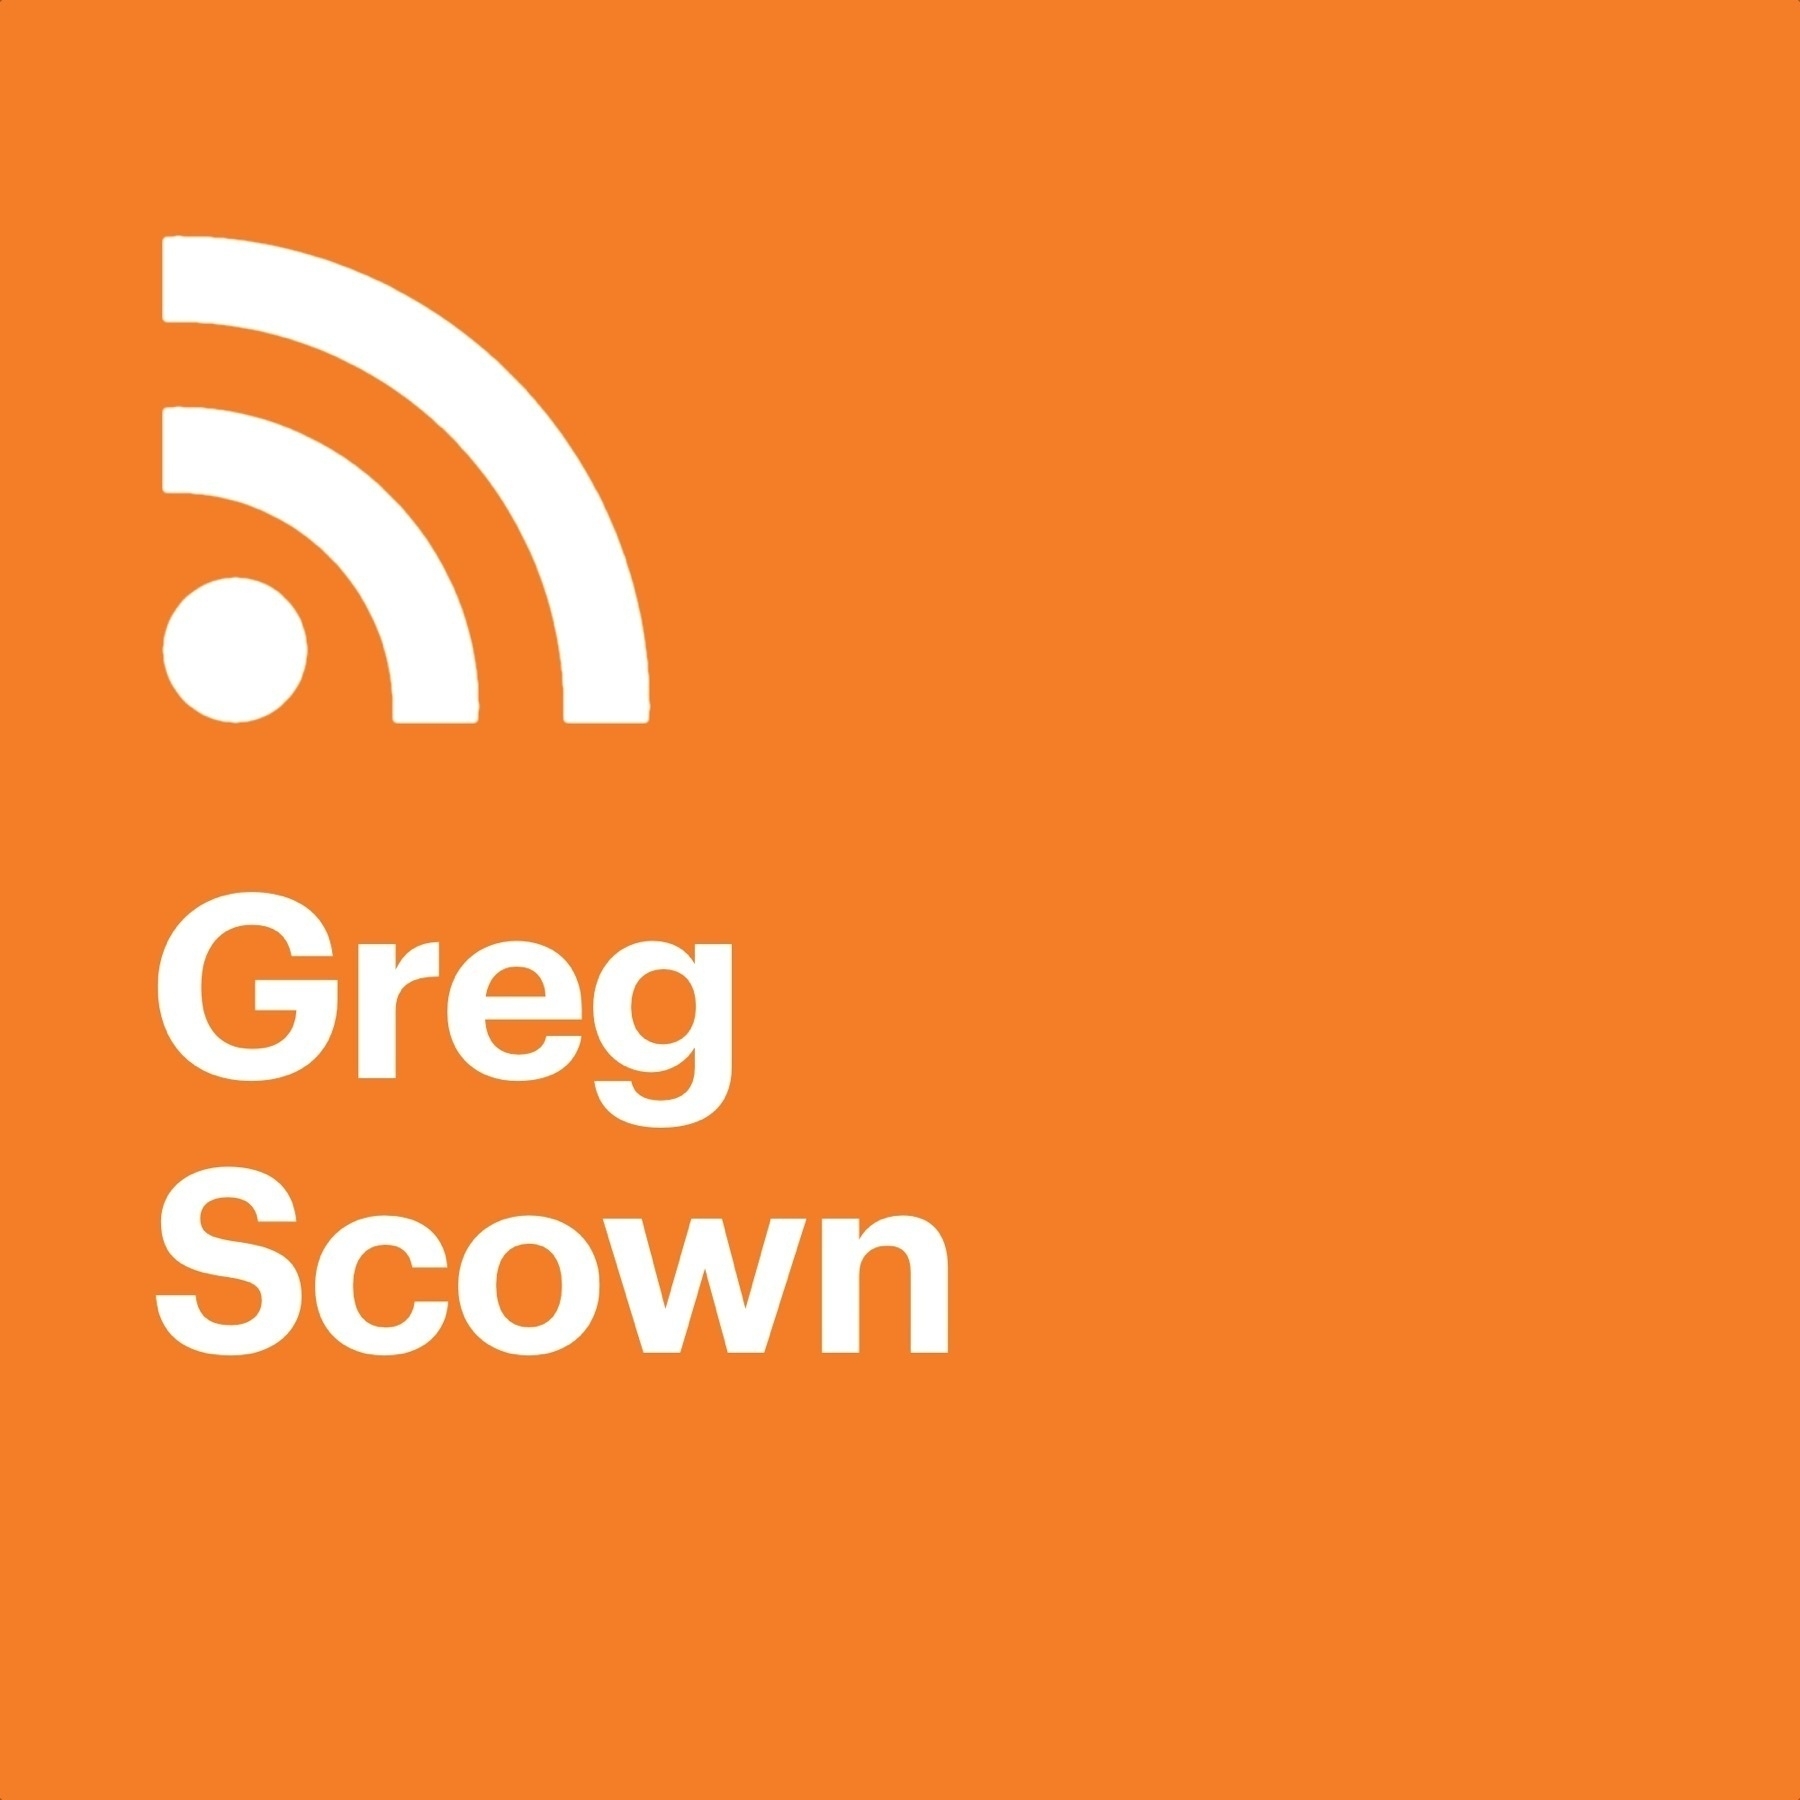 The RSS icon with the name Greg Scown underneath it